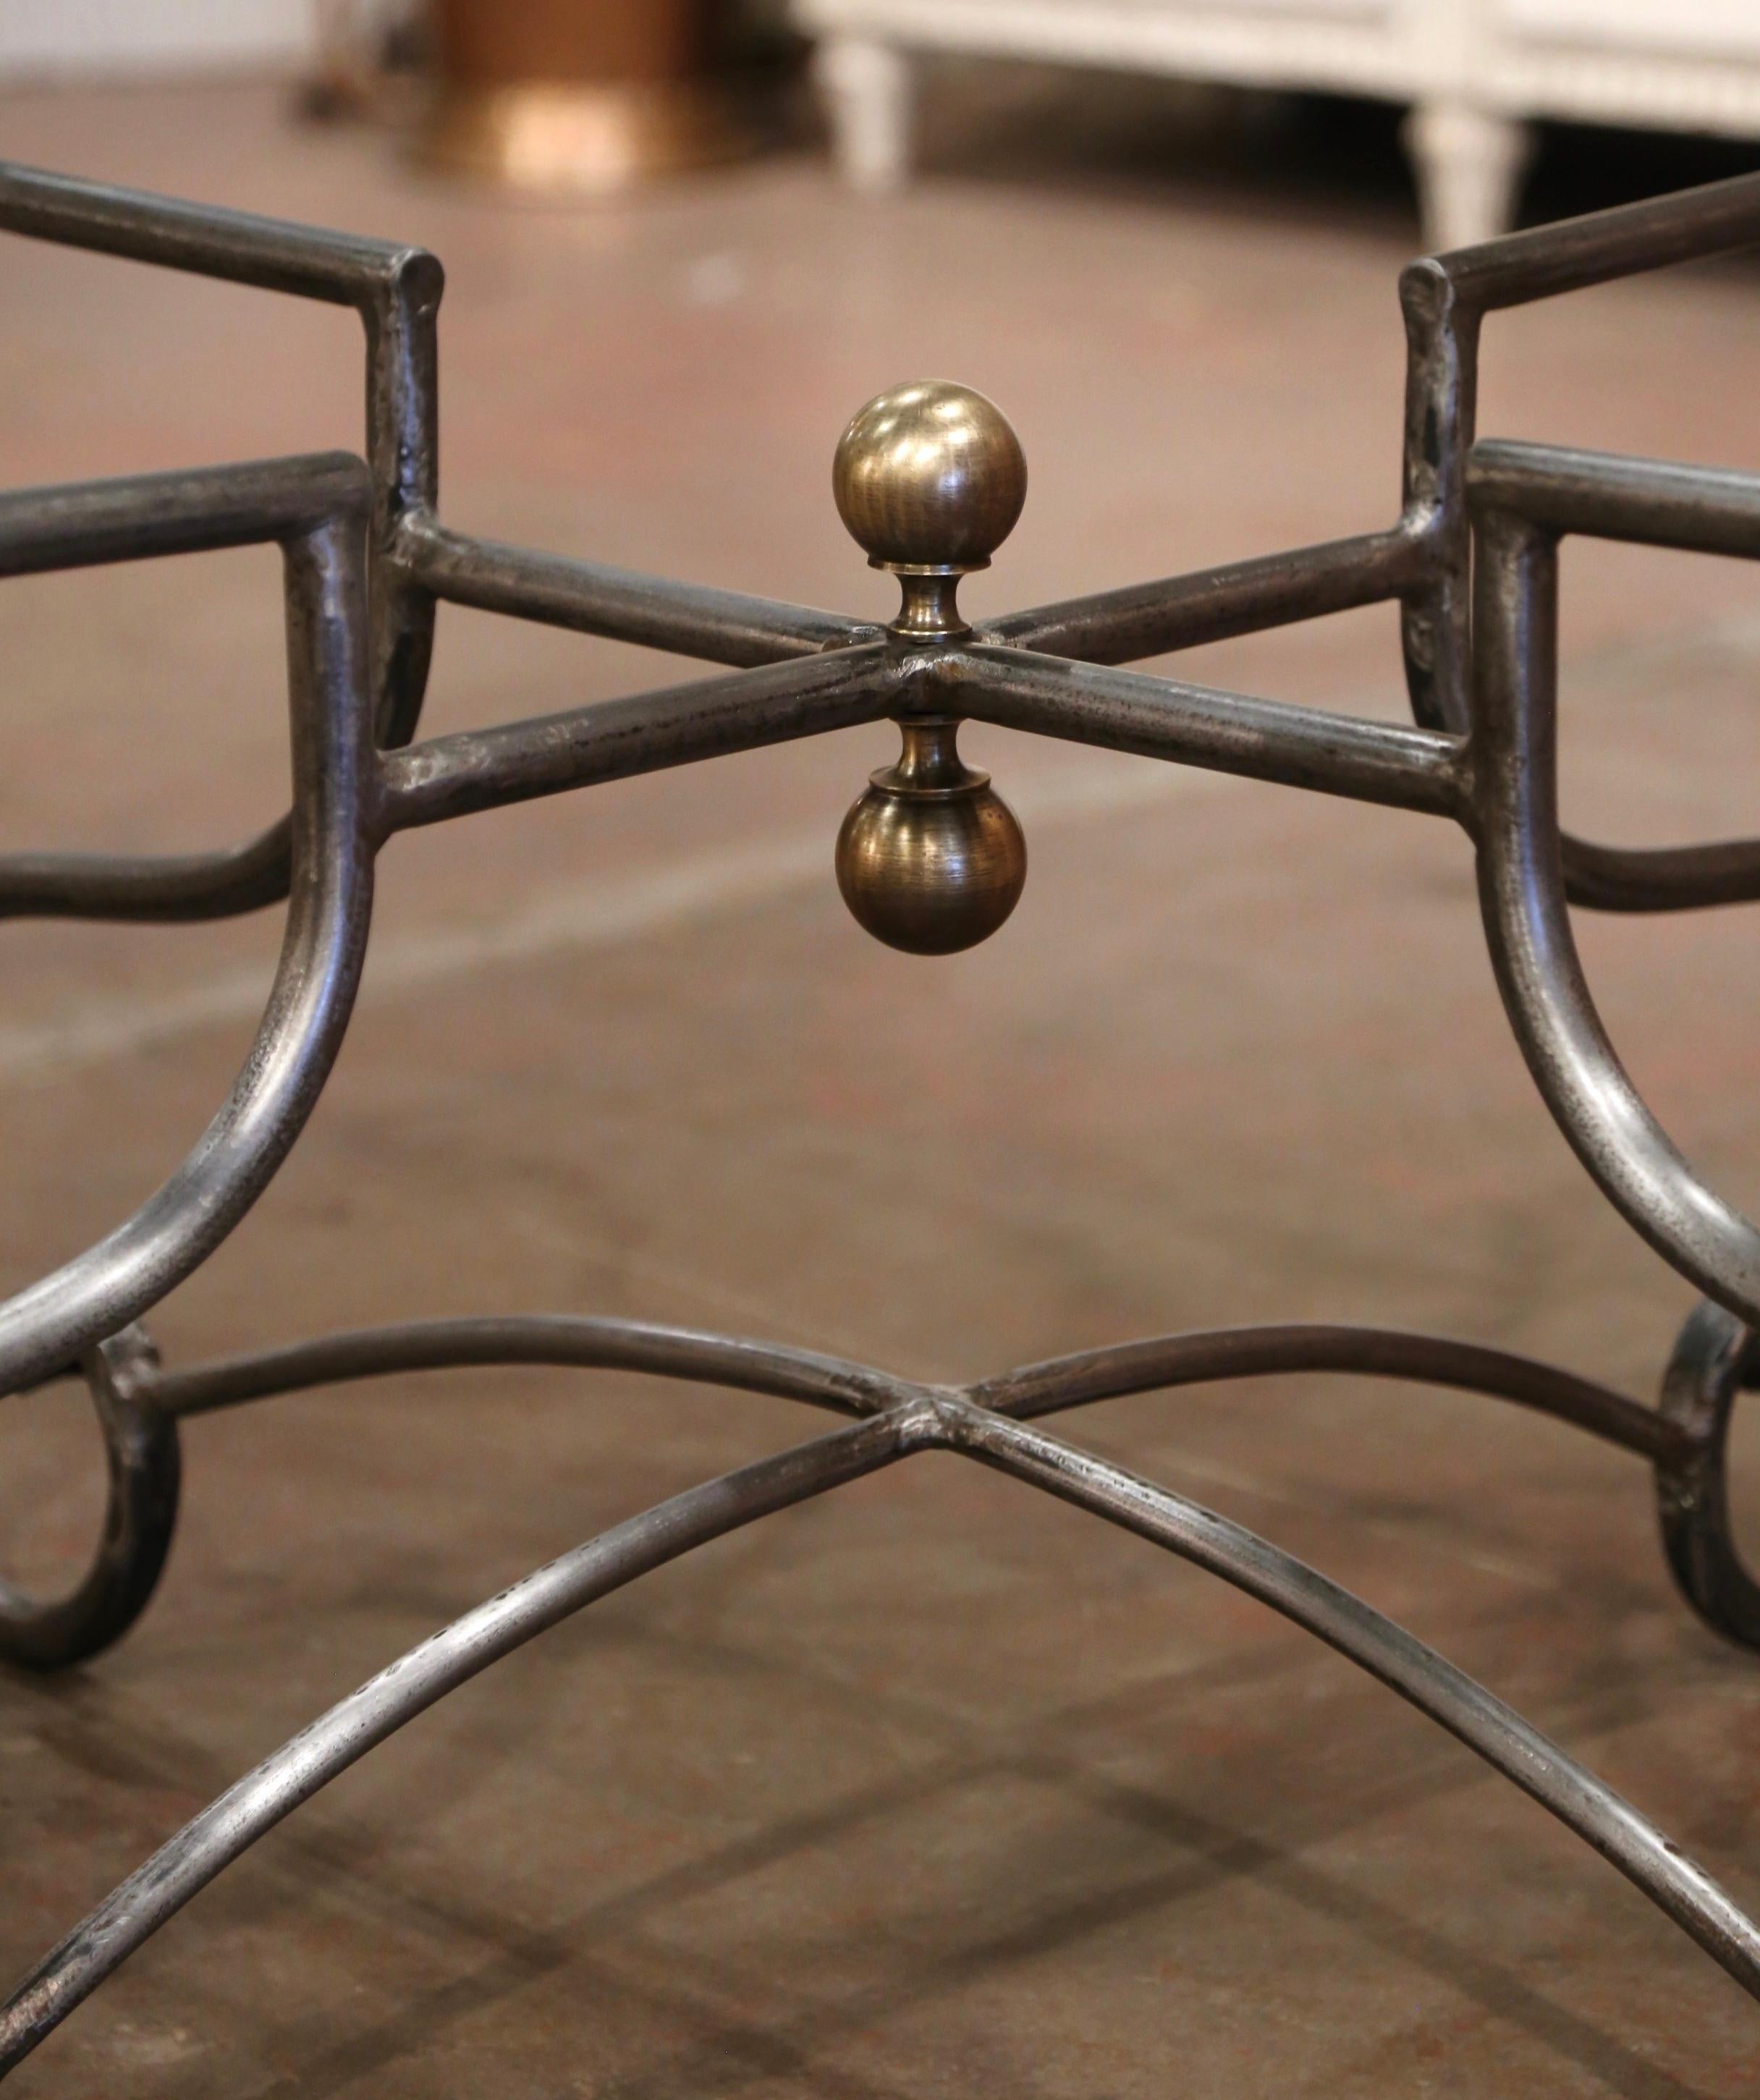 Forged Vintage French Polished Wrought Iron Dining Table Base with Round Glass Top